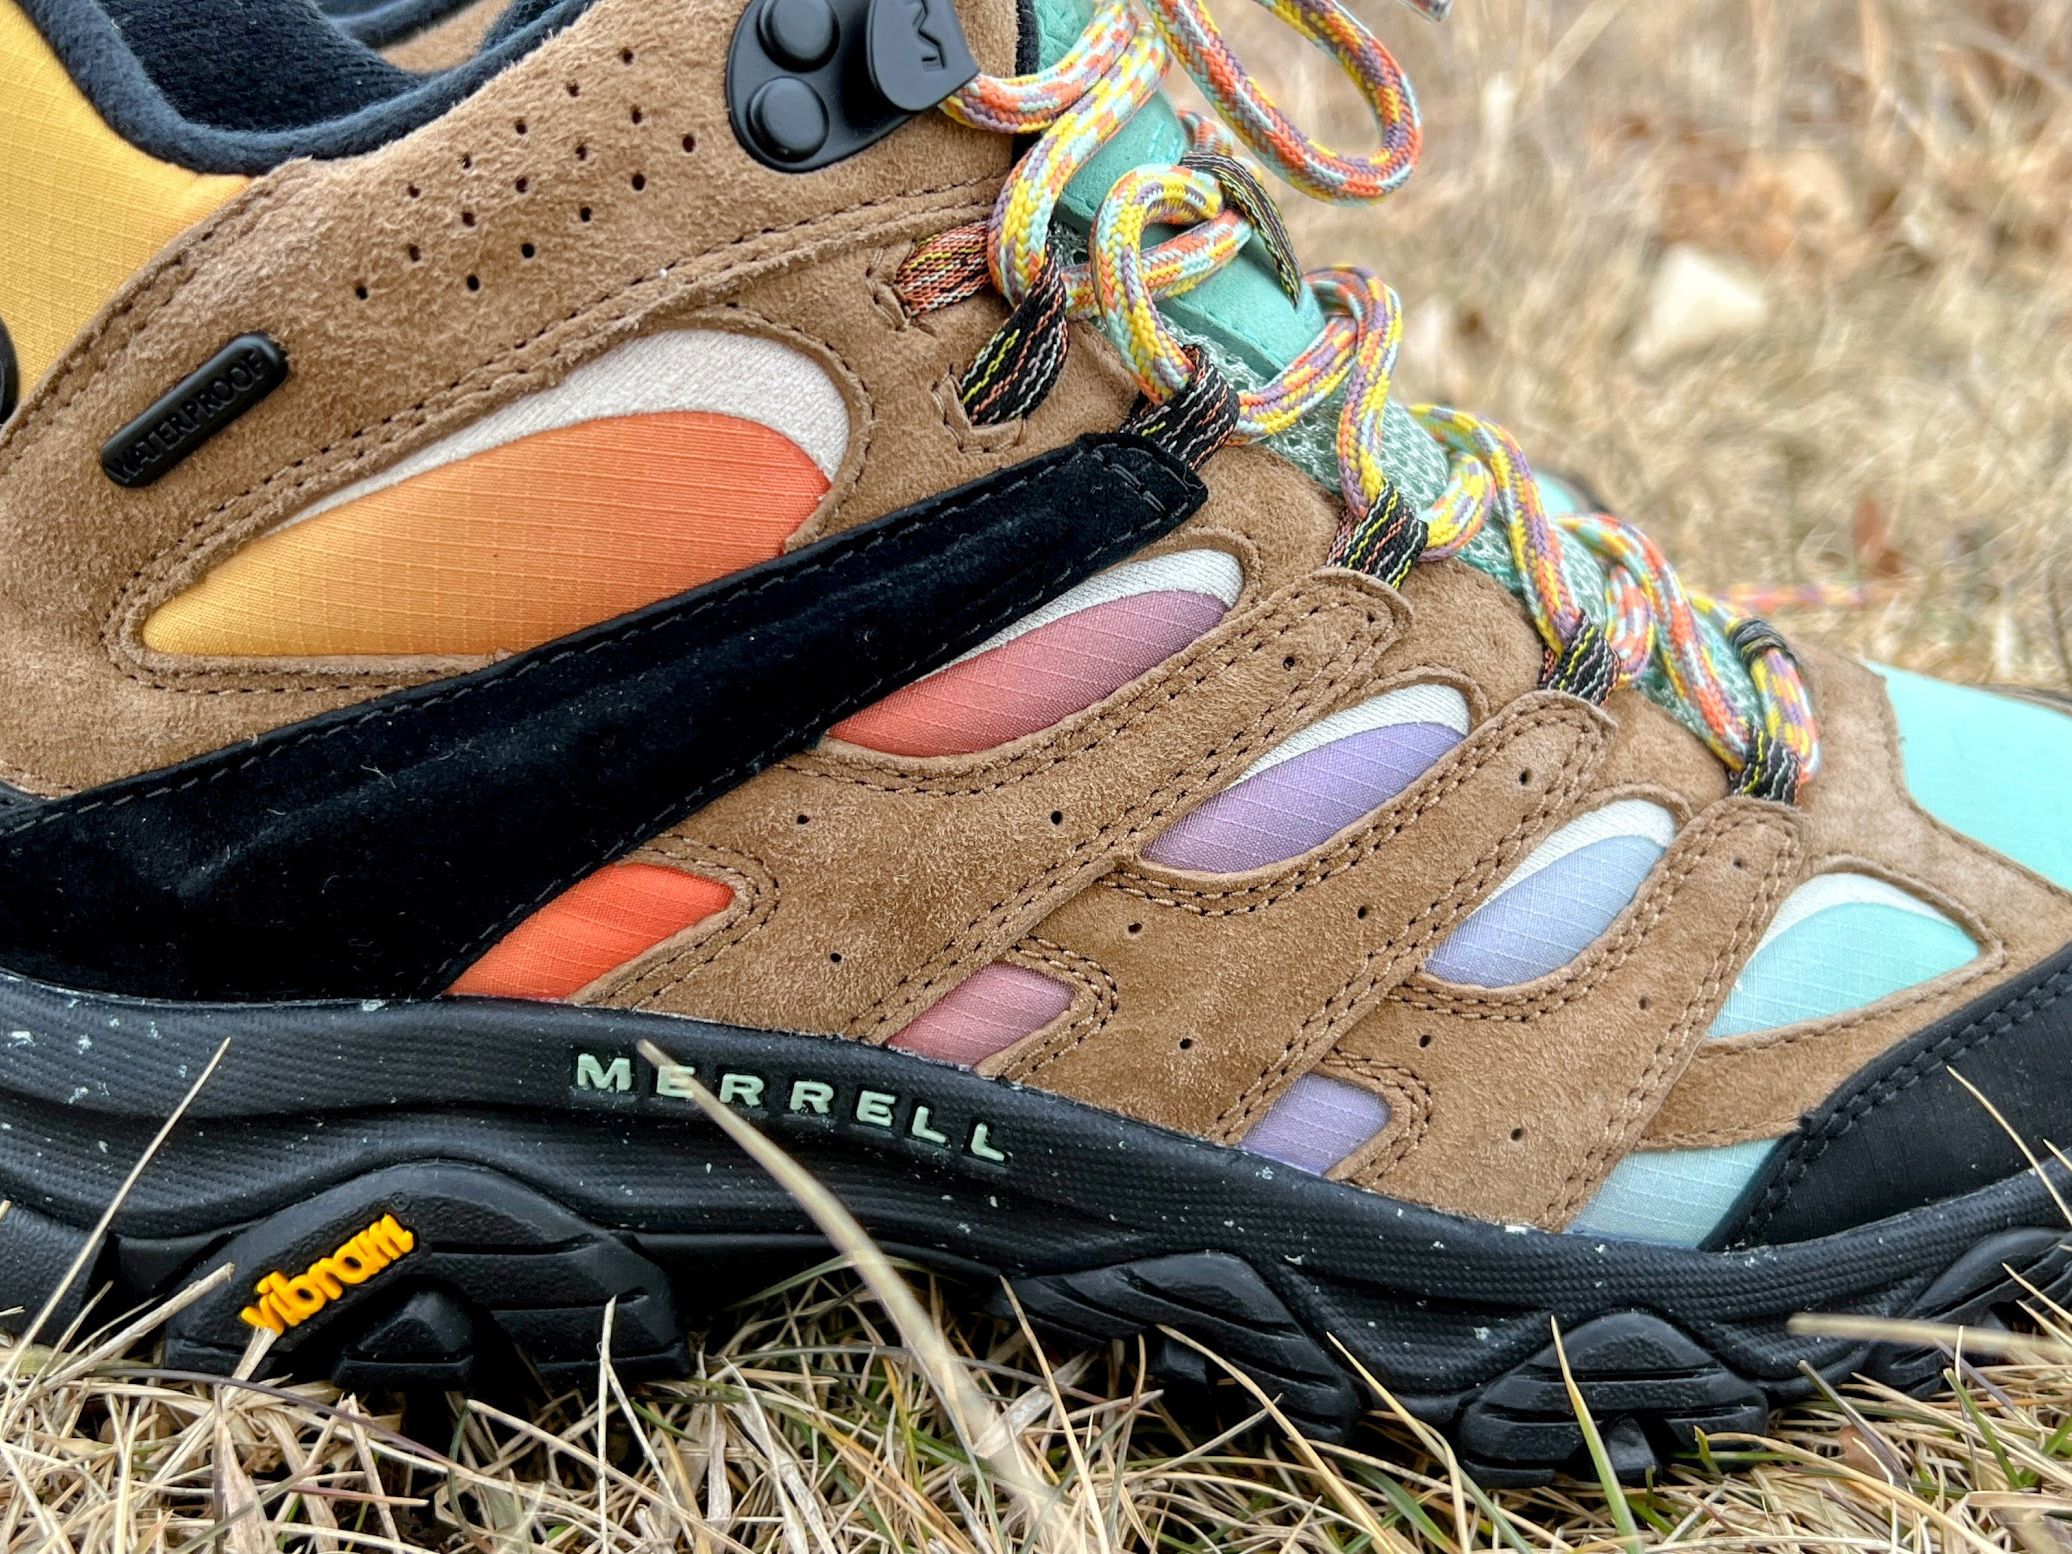 Bliv ved Rafflesia Arnoldi udstrømning Merrell and Unlikely Hikers collab on the new Moab 3s | CNN Underscored